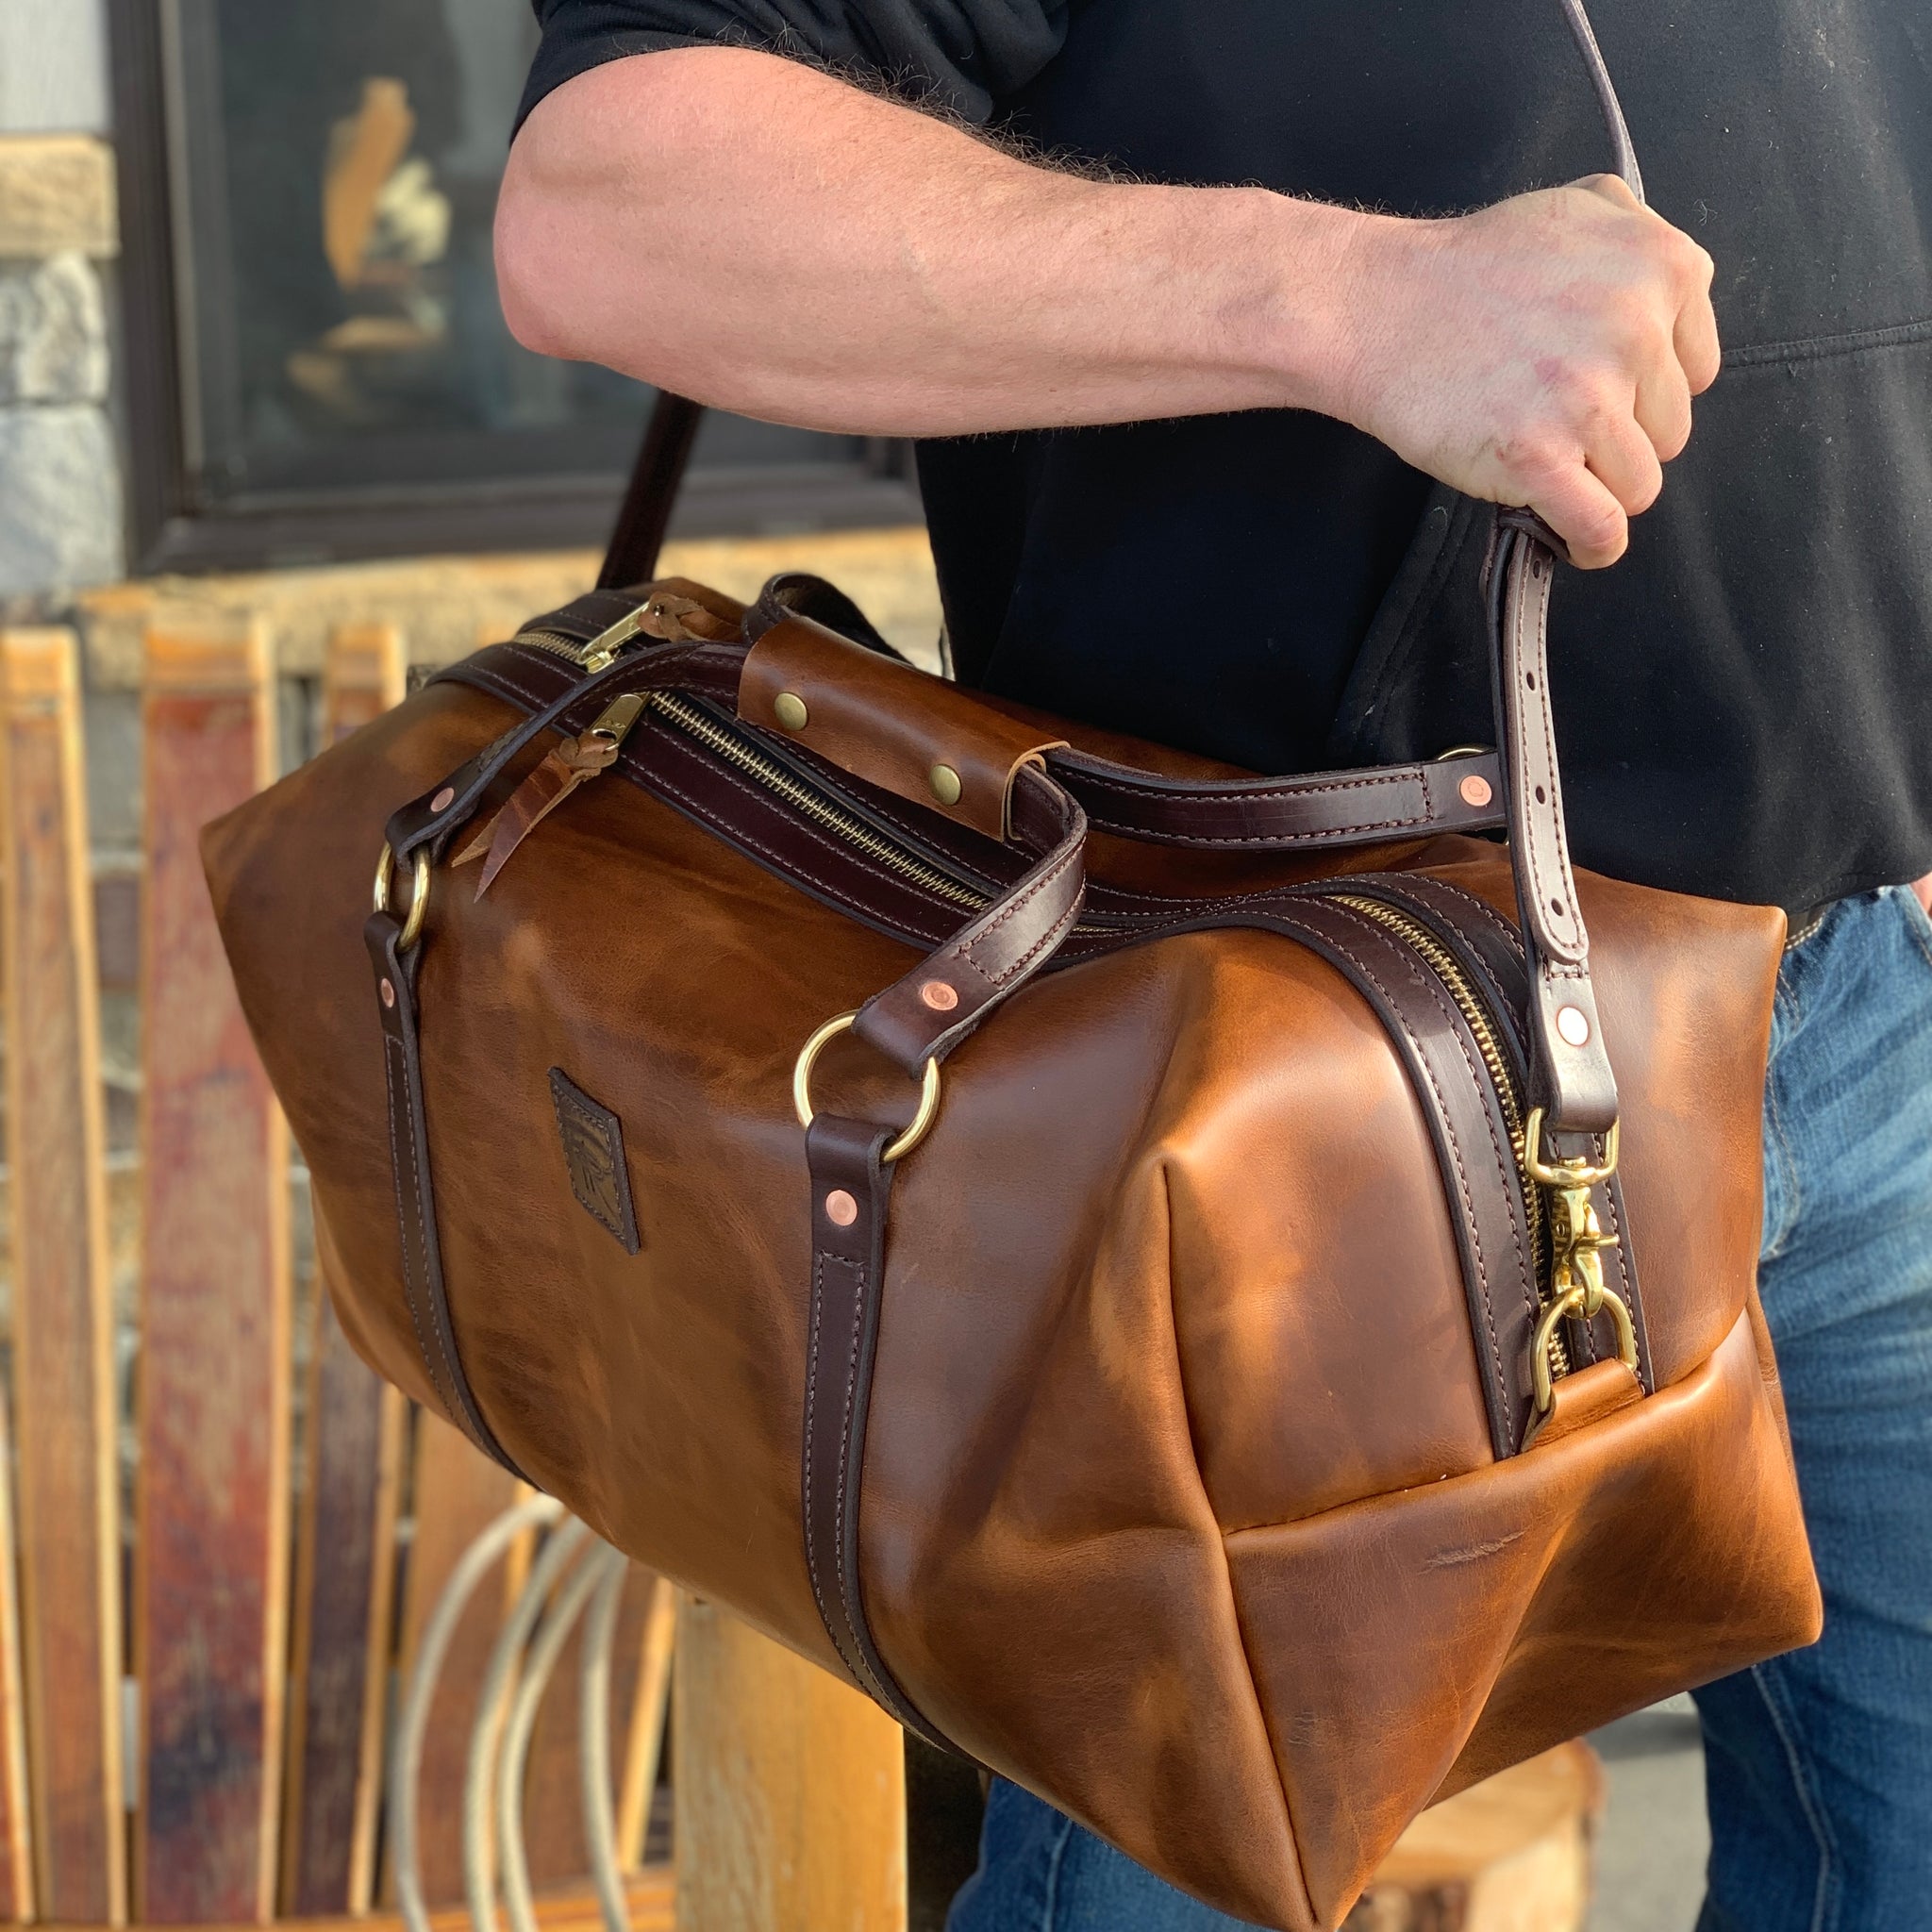 duffel bag leather travel bags leather craft business men shopping shop accessories hunting gear business casual coeur d'alene idaho fly fishing 